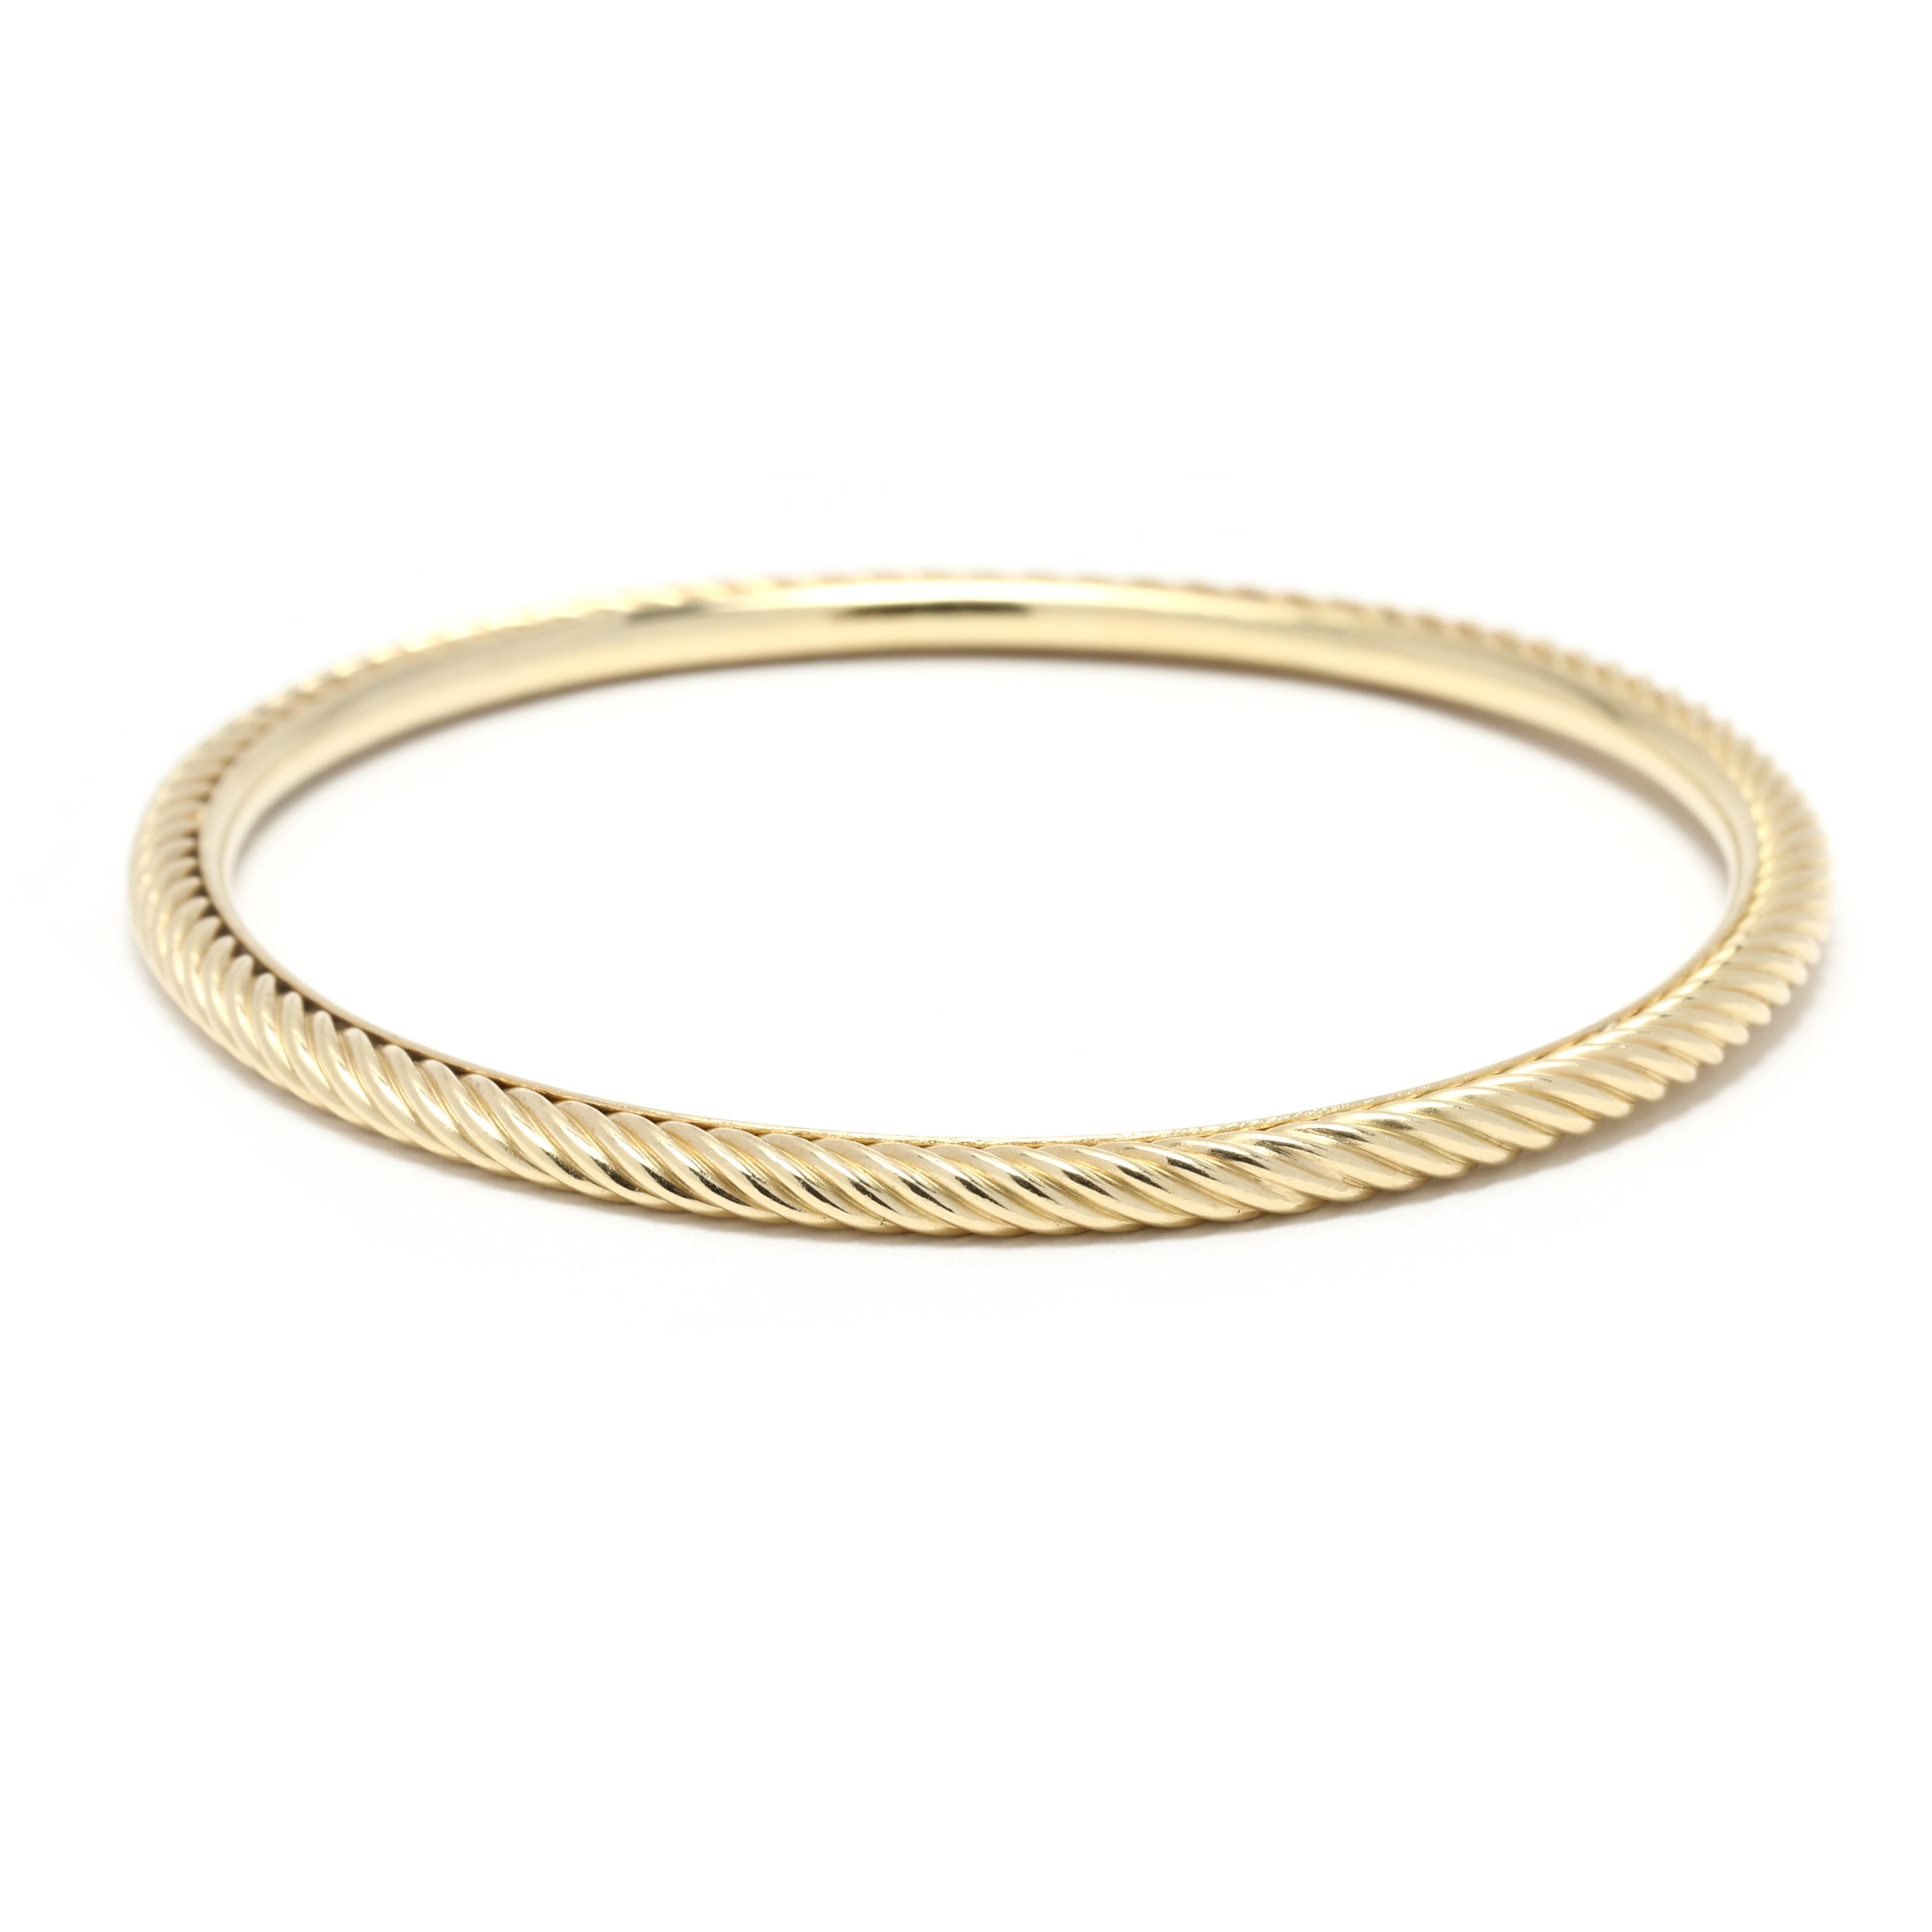 This David Yurman Gold Cable Bangle is a timeless classic! Crafted in 18K yellow gold and measuring 6.5 inches in length, this bangle is the perfect size for a small wrist. Featuring the signature gold cable twist, this bangle is a must-have